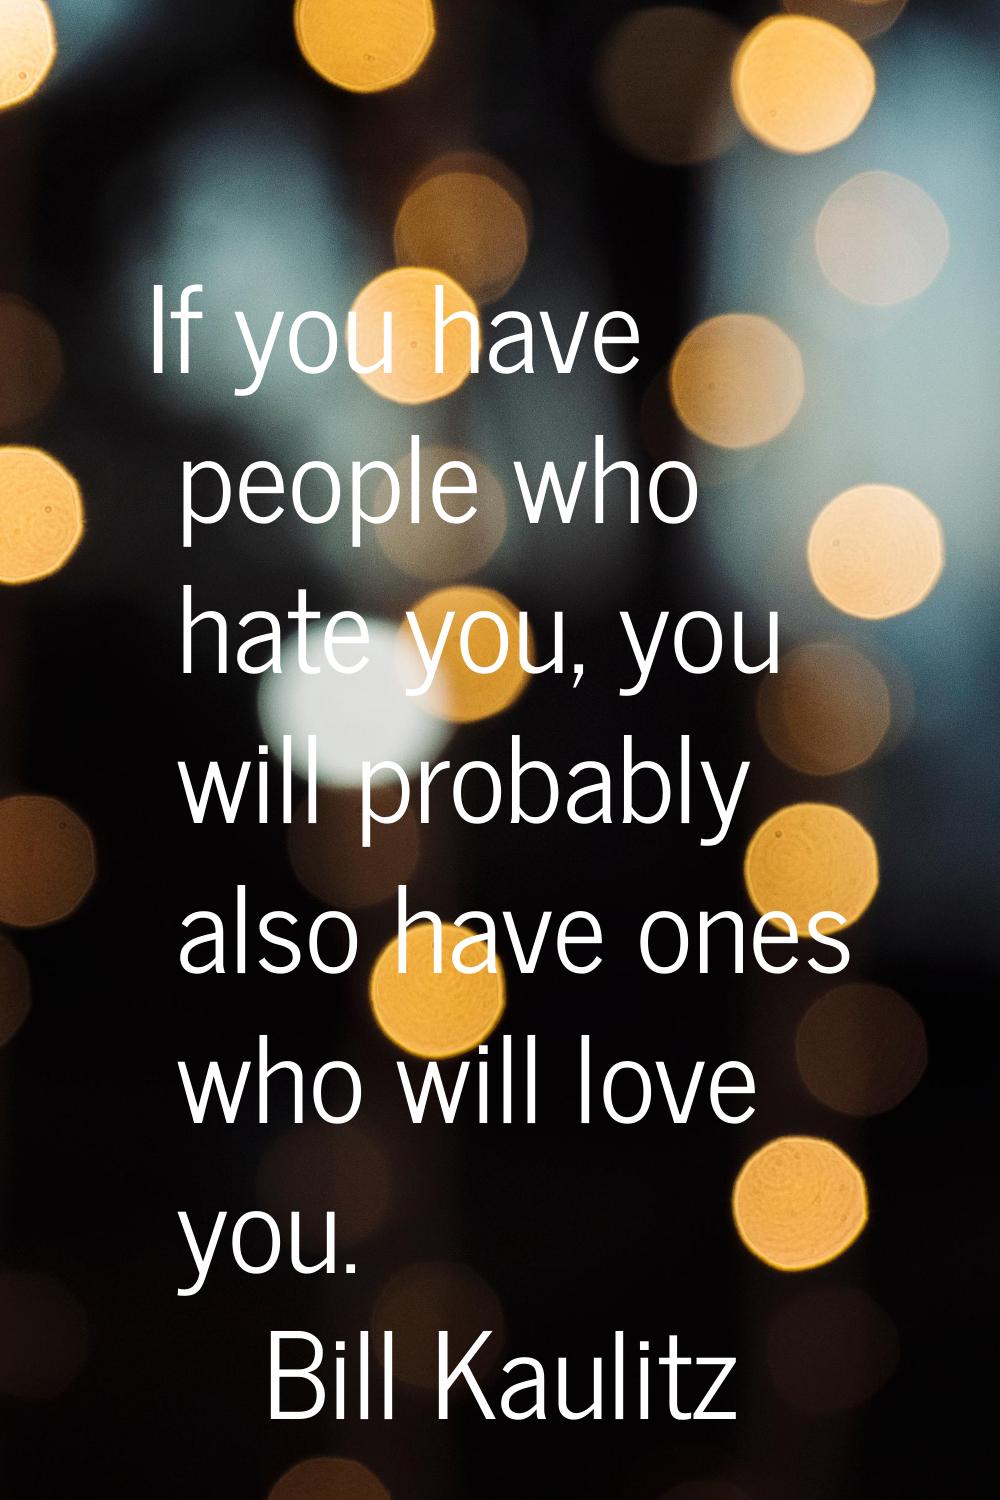 If you have people who hate you, you will probably also have ones who will love you.